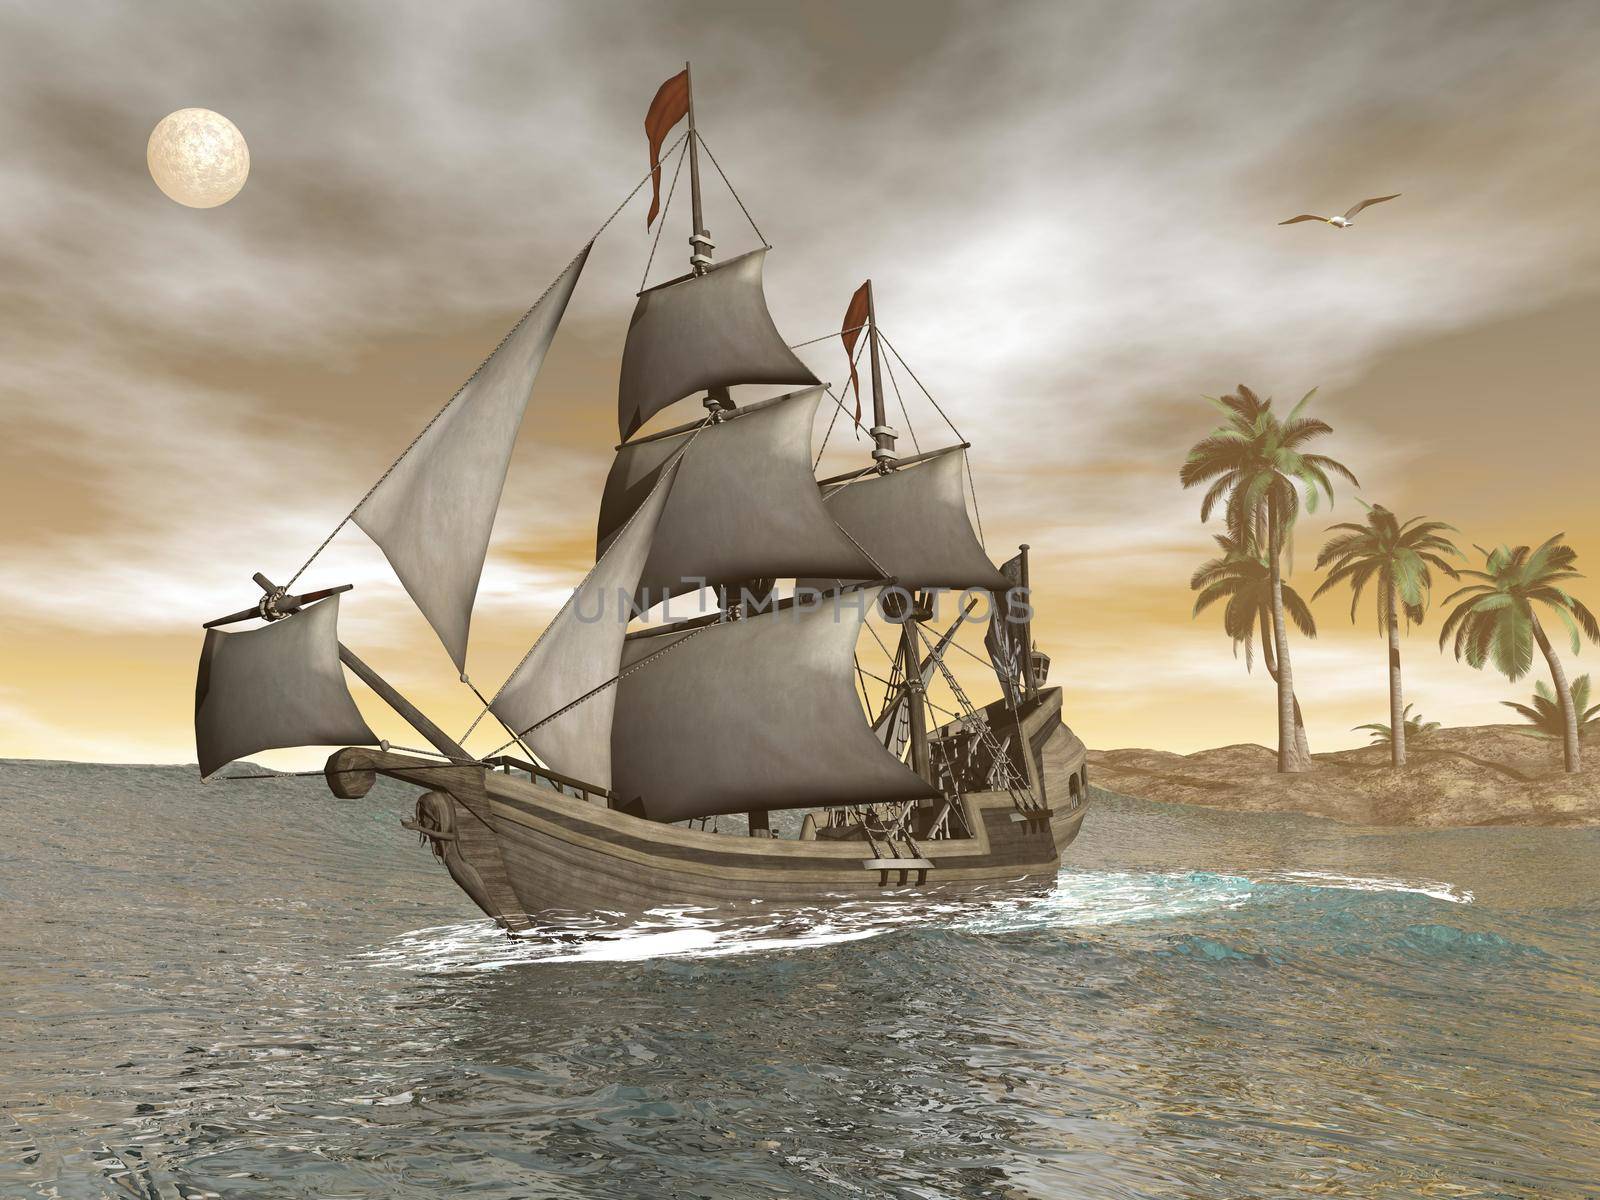 Pirate ship leaving - 3D render by Elenaphotos21